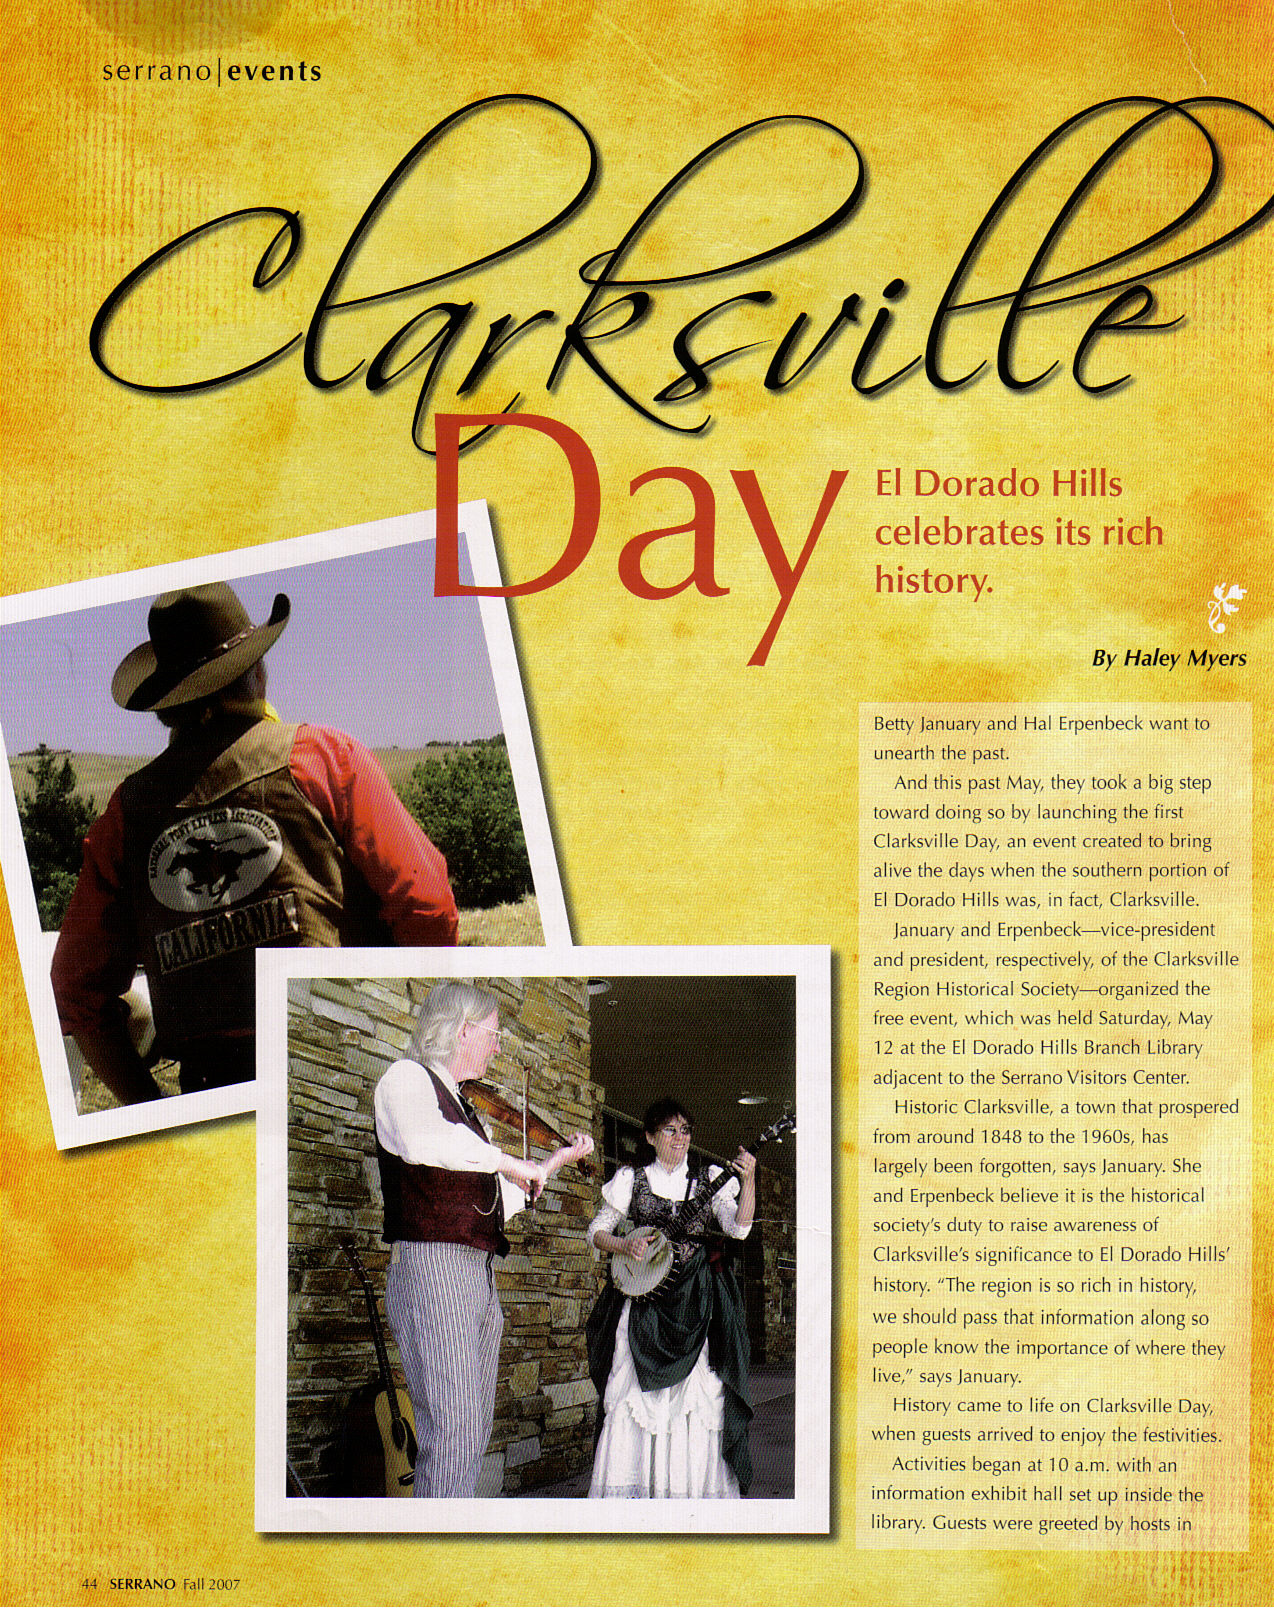 2007 Clarksville Day article